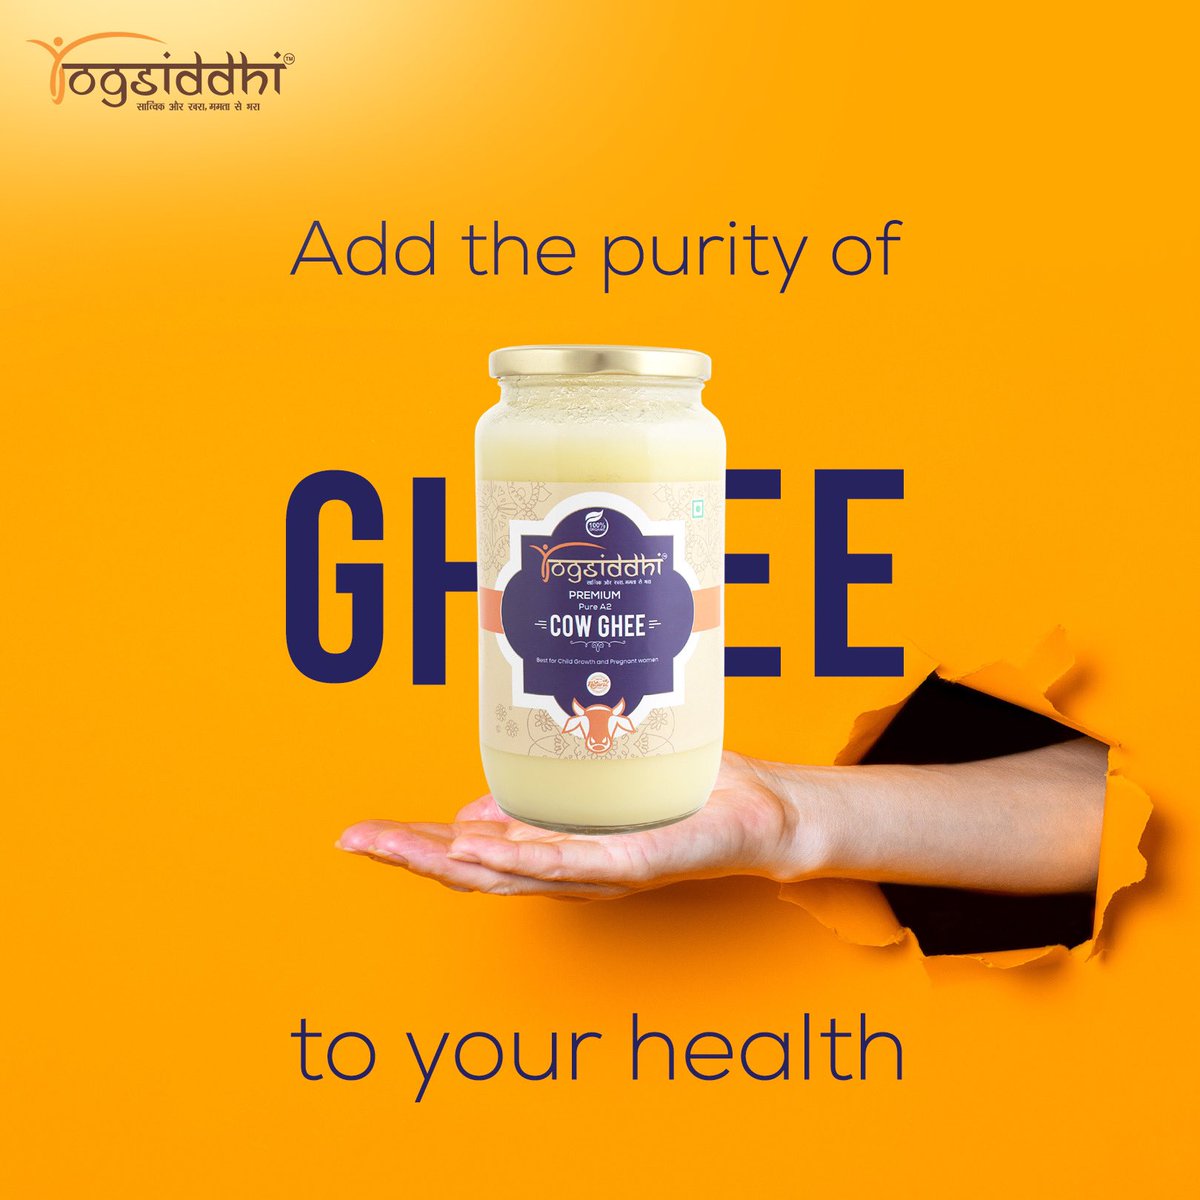 Ghee in your diet to promote a healthy lifestyle

#healthynutrition #healthylifestyle #nutrition #nutritionplan #healthyfood #nutritiontips #nutritioncoaching #nutritionfacts #nutritioncoach #healthyeatinghabits #nutritional #healthyfoodideas #healthyfoodie